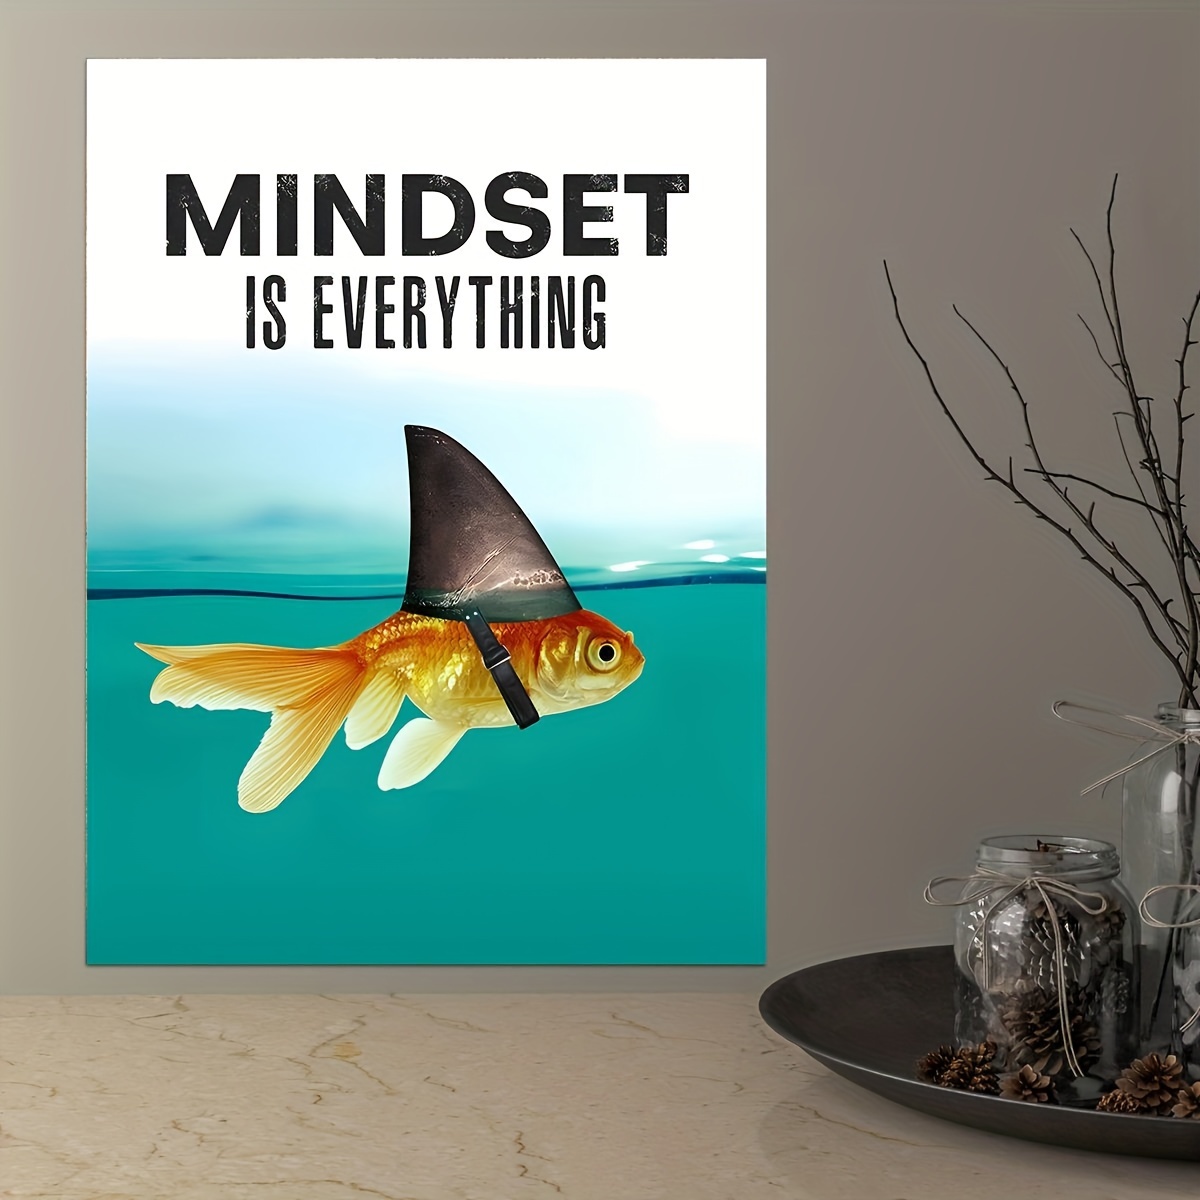 3pcs Mindset Is Everything Wall Art Blue Motivational Posters